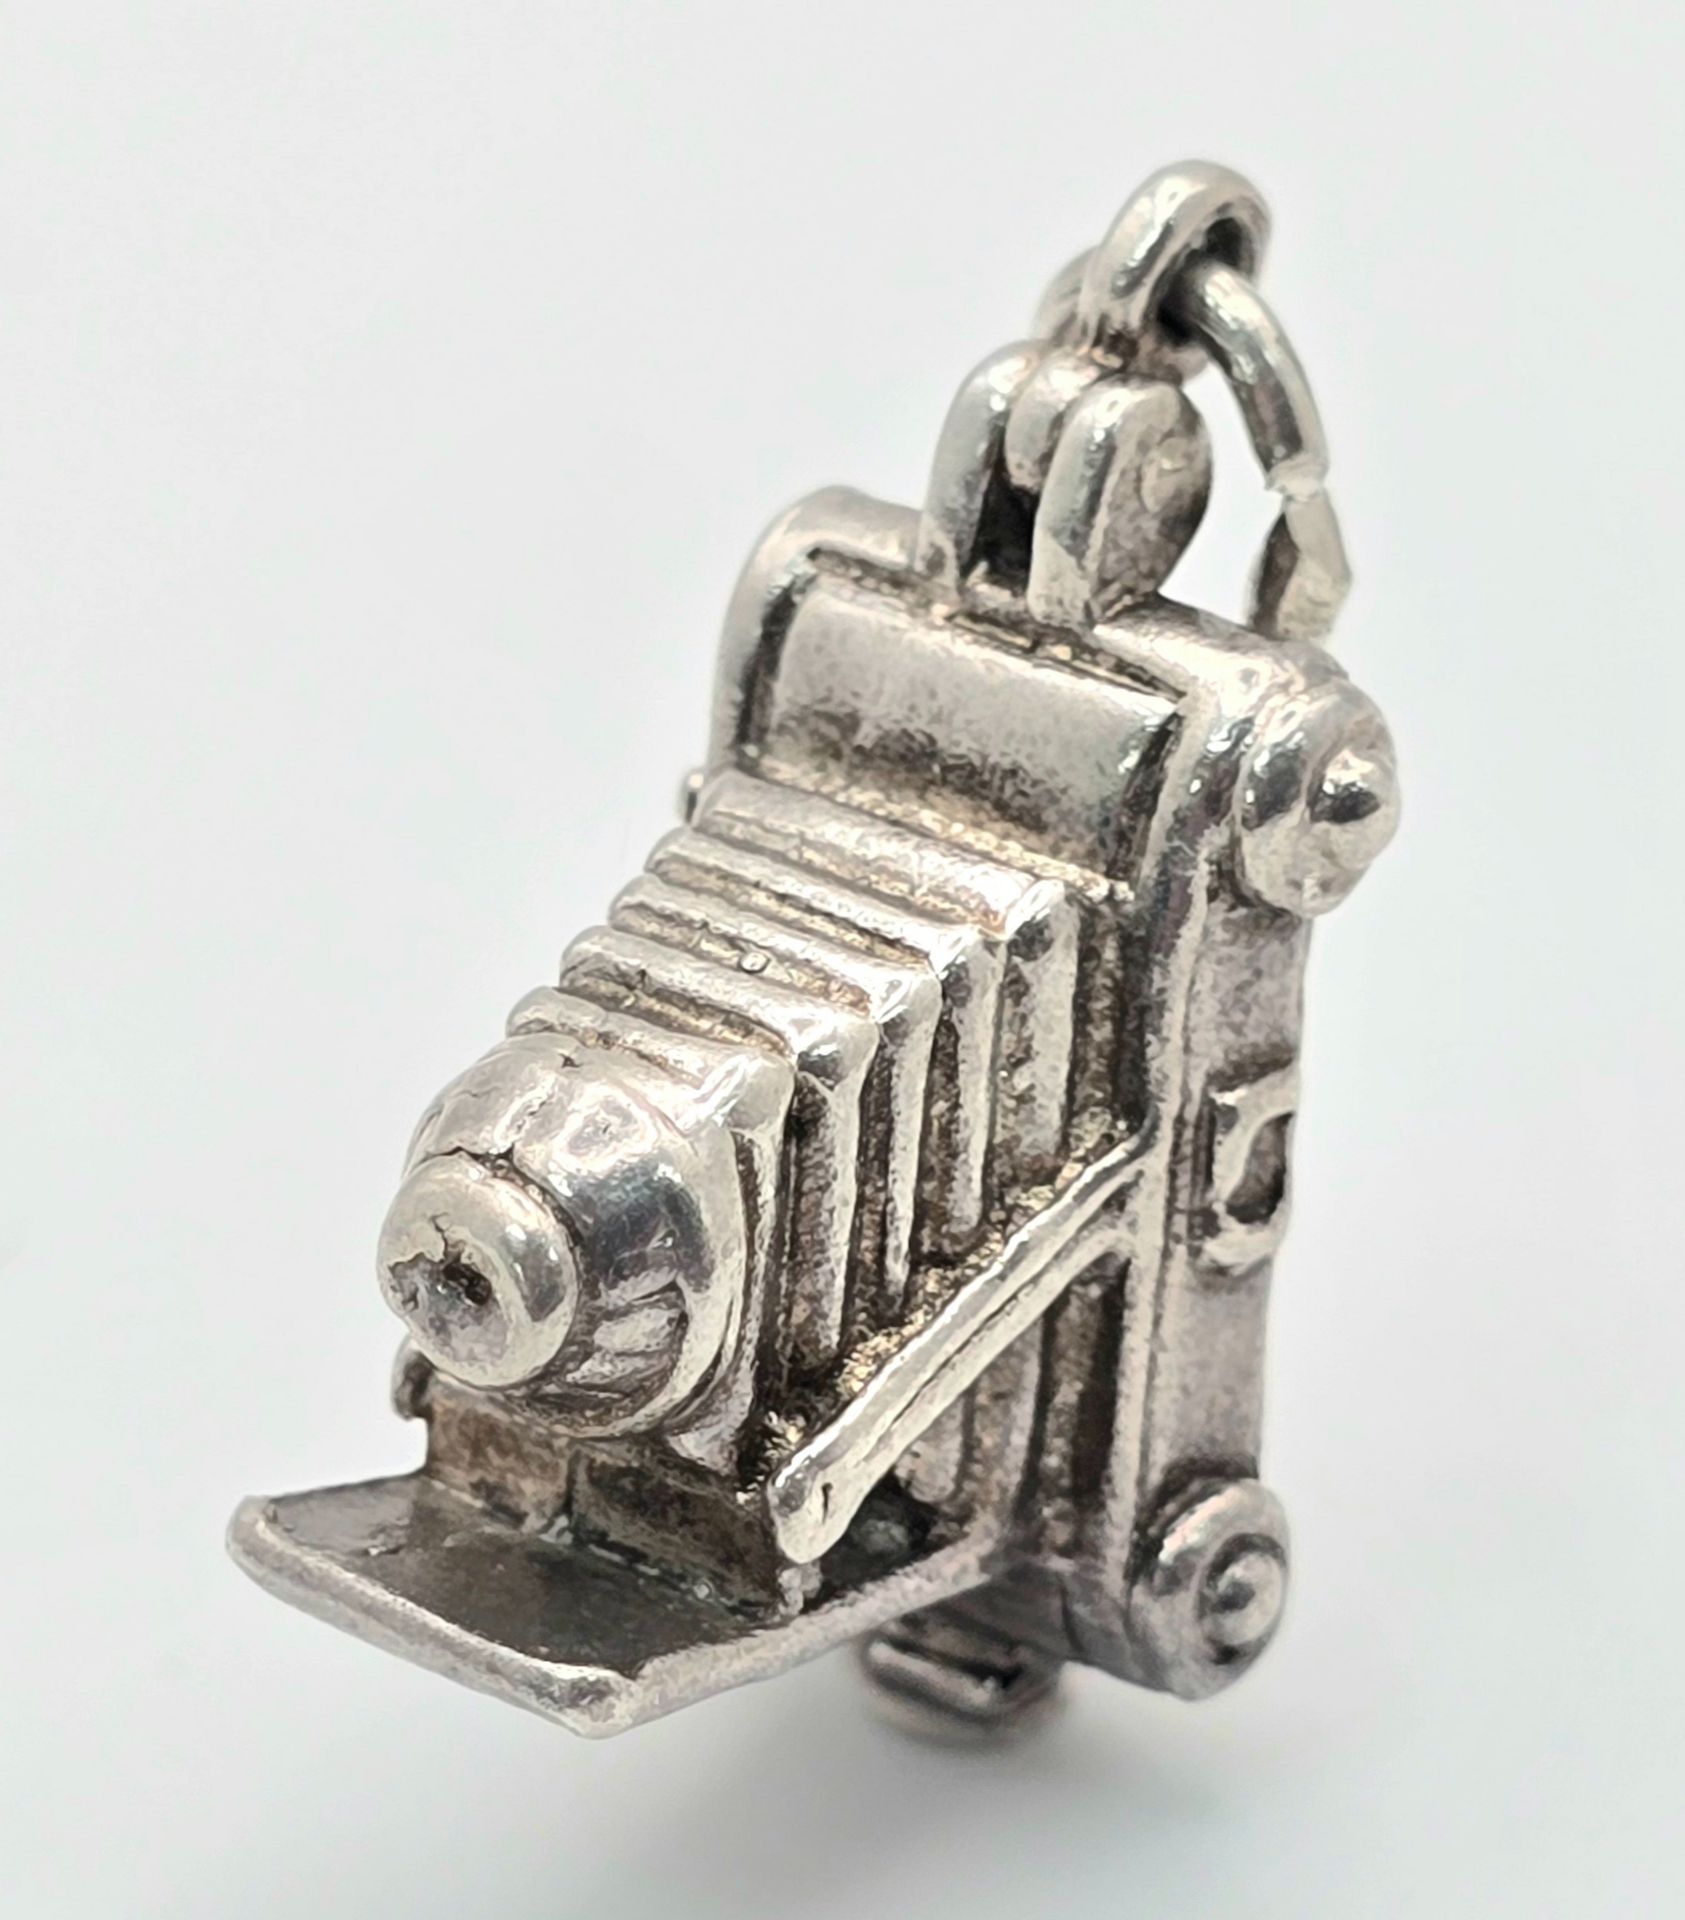 A STERLING SILVER VINTAGE CAMERA CHARM. 2.5cm length, 4.8g weight. Ref: SC 8115